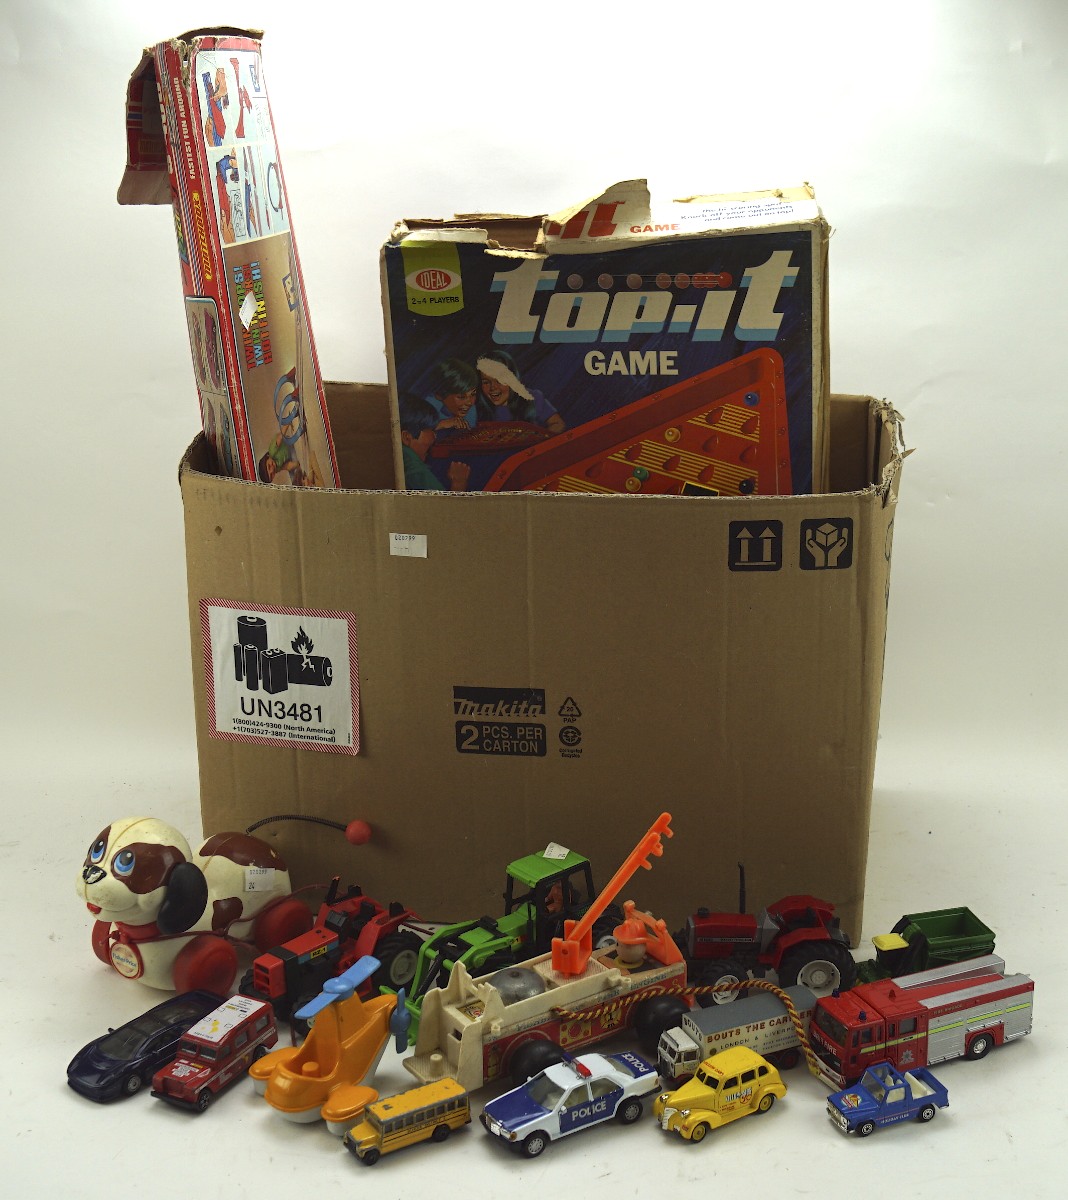 A collection of assorted vintage toys, to include die cast model vehicles,